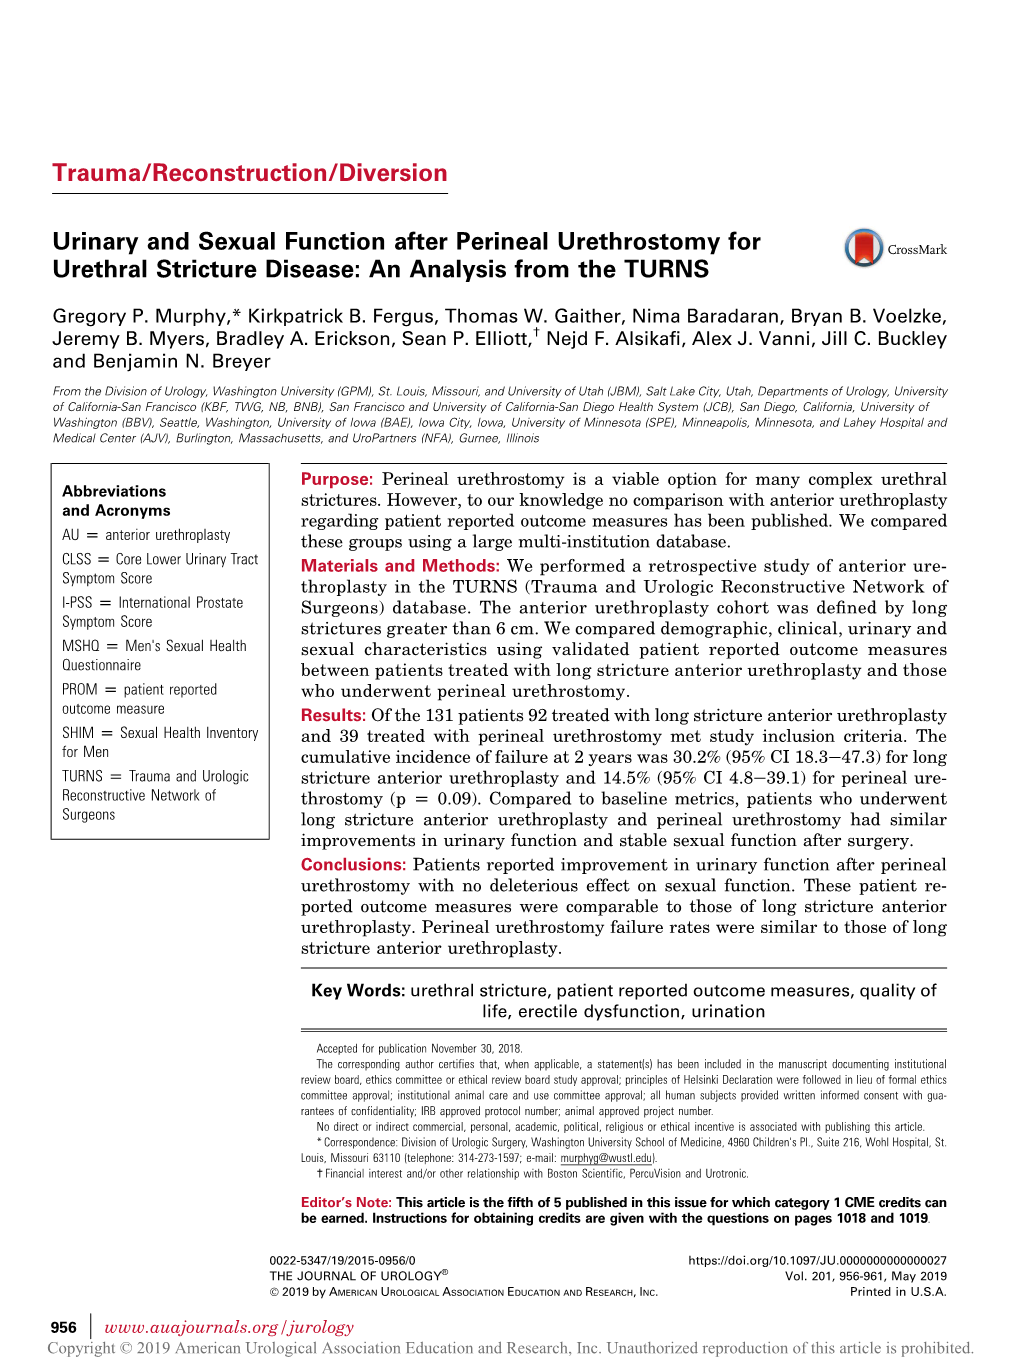 Urinary and Sexual Function After Perineal Urethrostomy for Urethral Stricture Disease: an Analysis from the TURNS